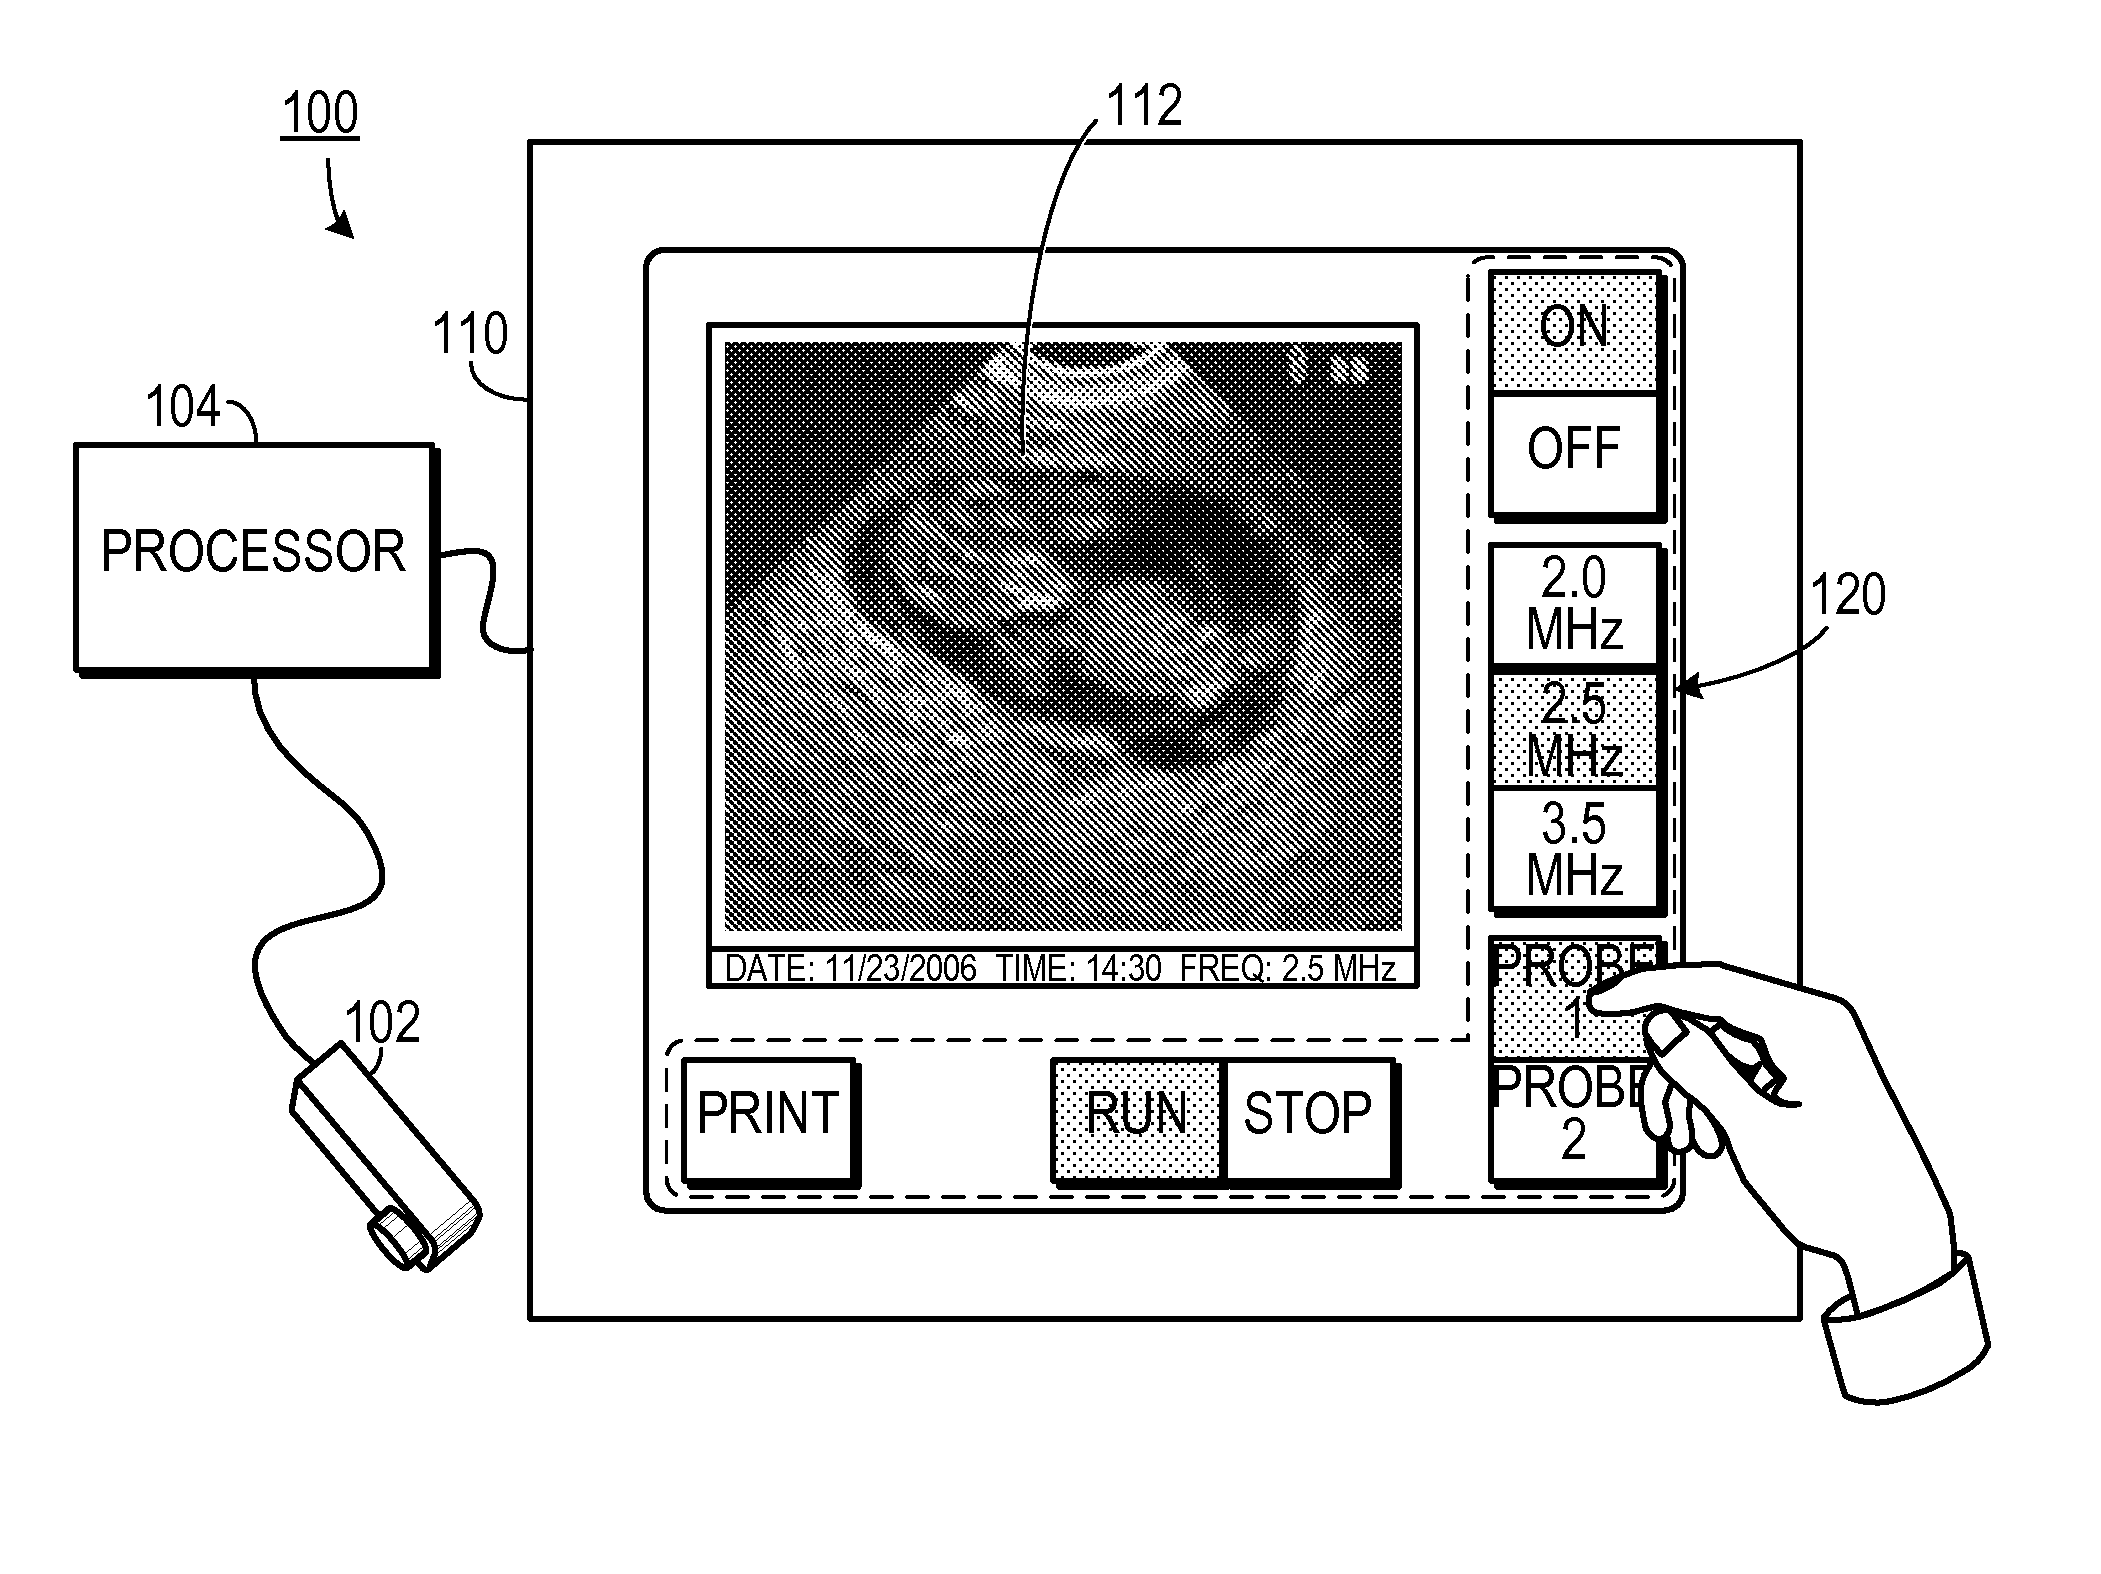 Portable ultrasound with touch screen interface